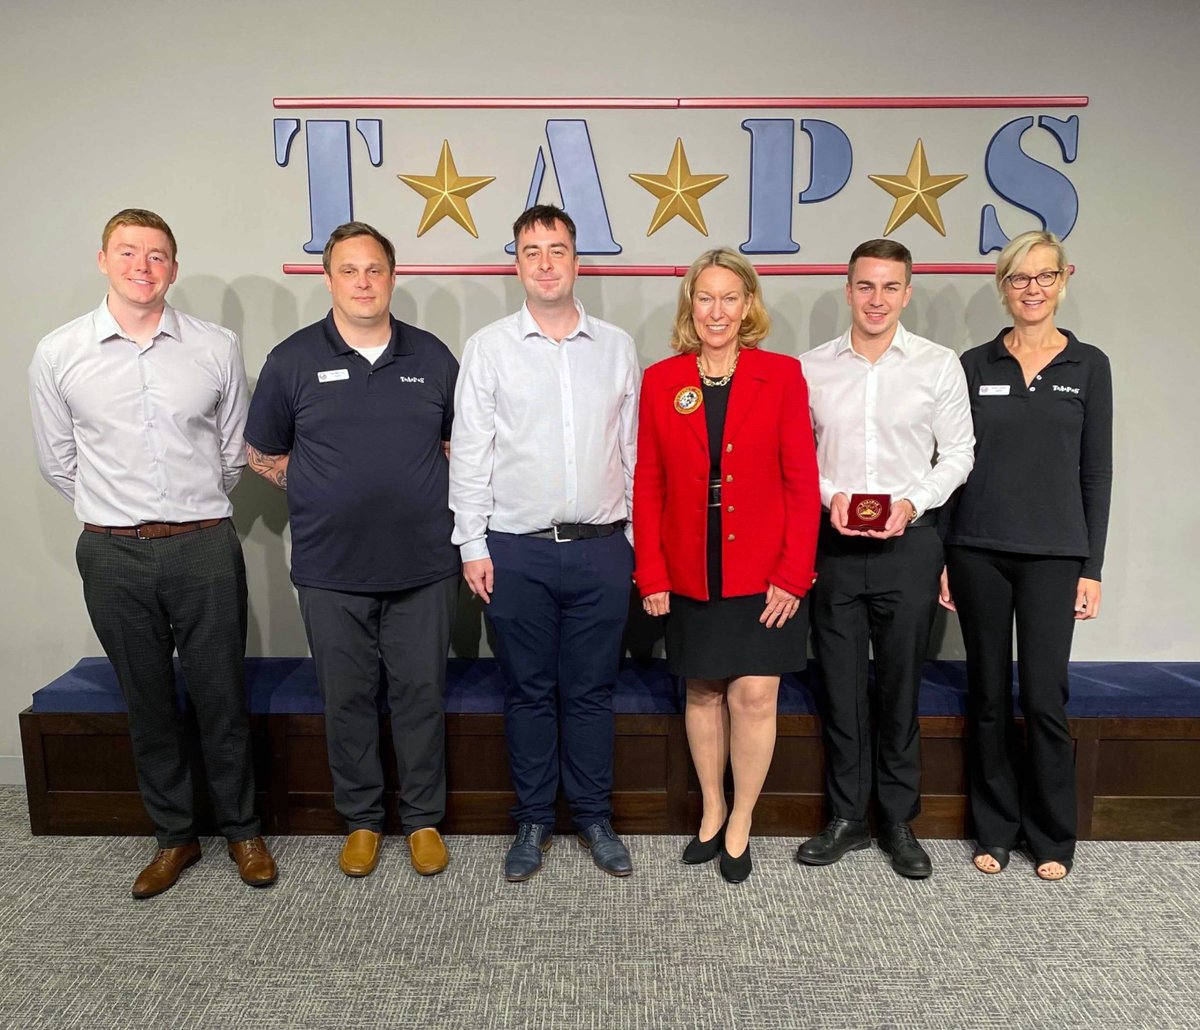 On this year's #NationalNonprofitDay, we are honored to be visiting @Bonnie_at_TAPS, founder of @TAPSorg.

TAPS provides 24-hour compassionate care to anyone who has lost a military loved one, and Connex One is very proud to have them as one of our clients.